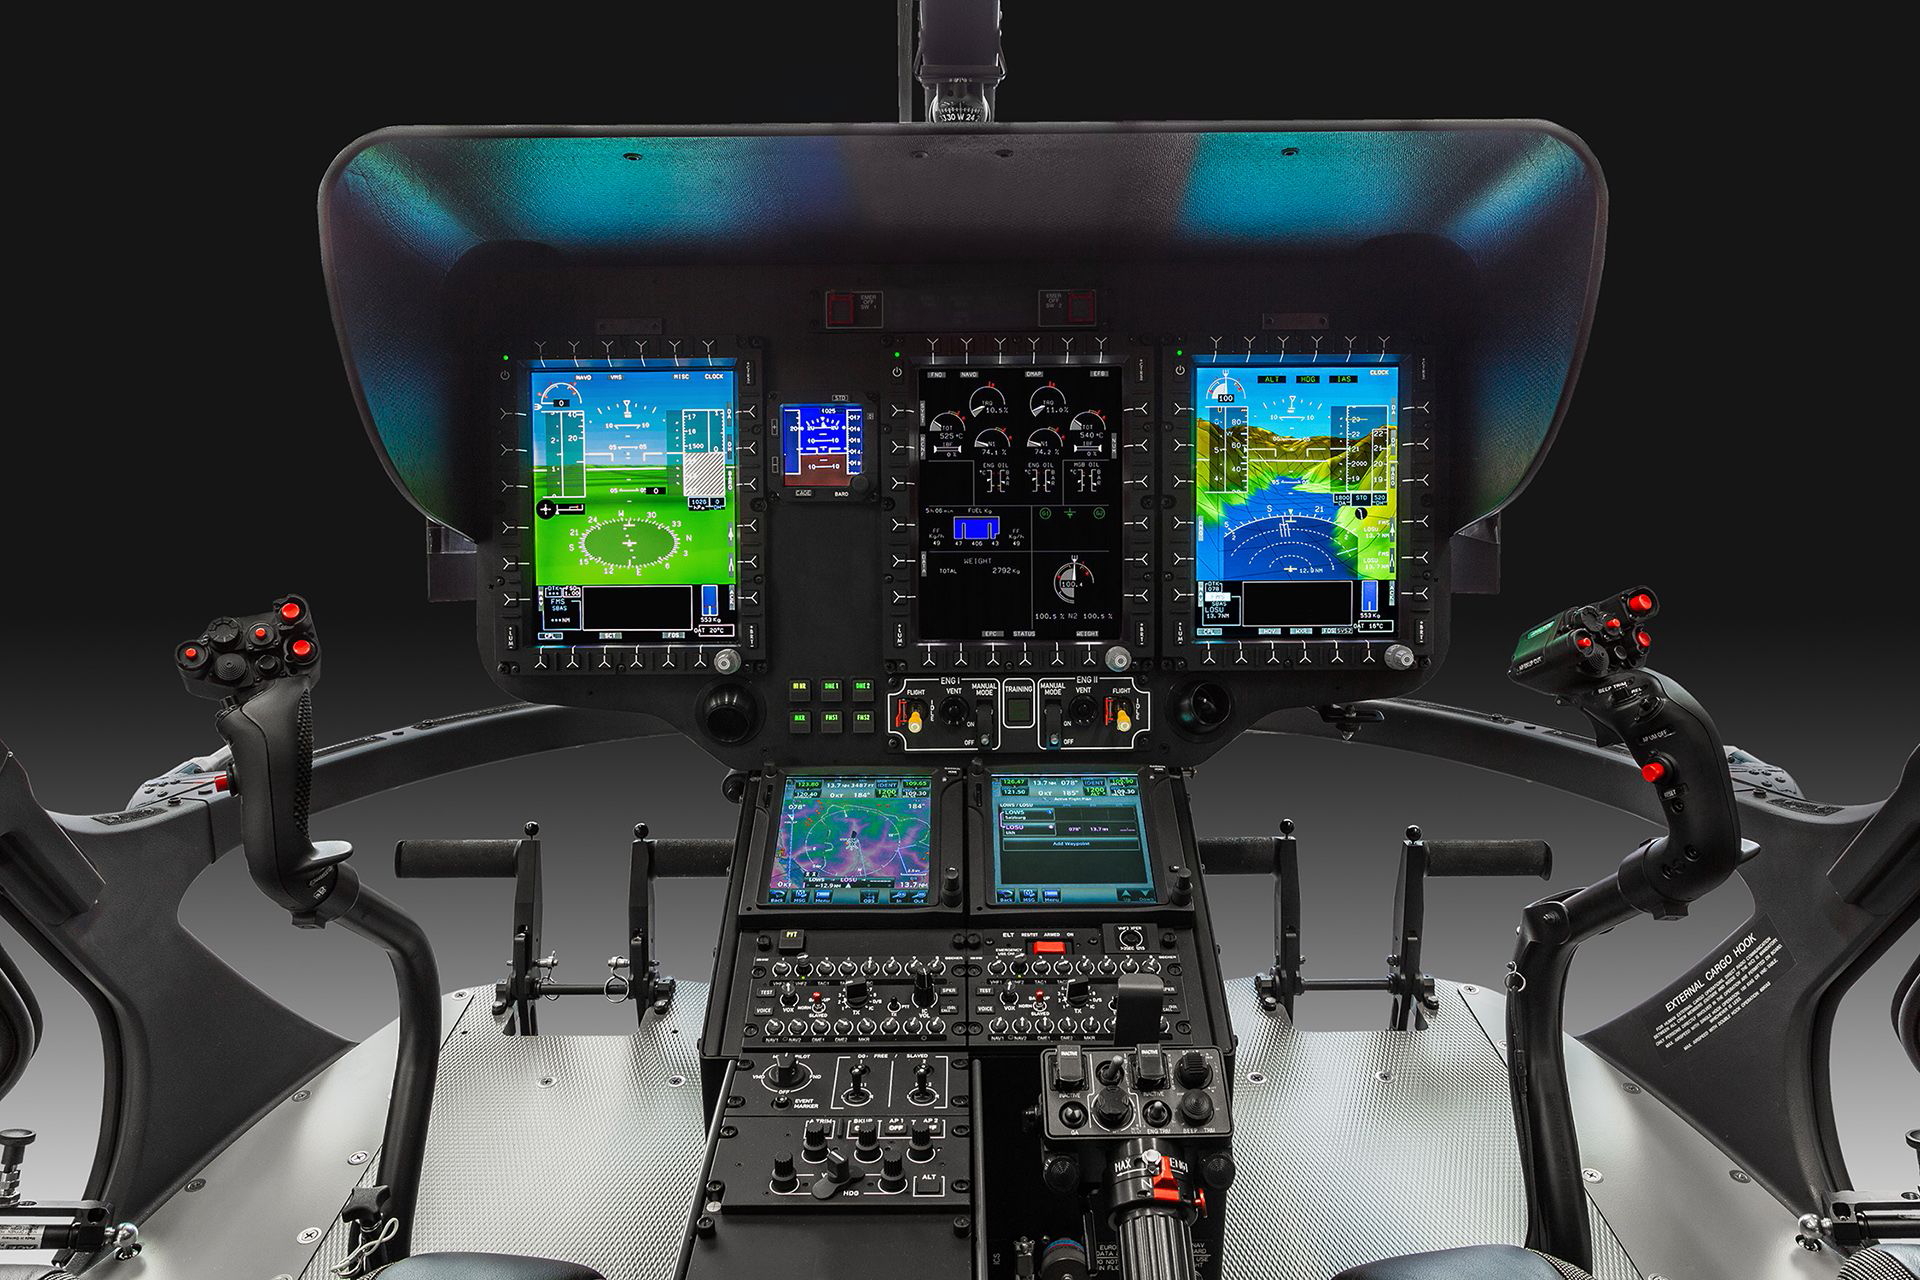 Airbus has also rolled out Helionix Step 3 on the H145, an enhanced version of Airbus’ Helionix avionics suite that enhances situational awareness, improves availability, accelerates helicopter connectivity, and reduces maintenance costs. Click to enlarge.